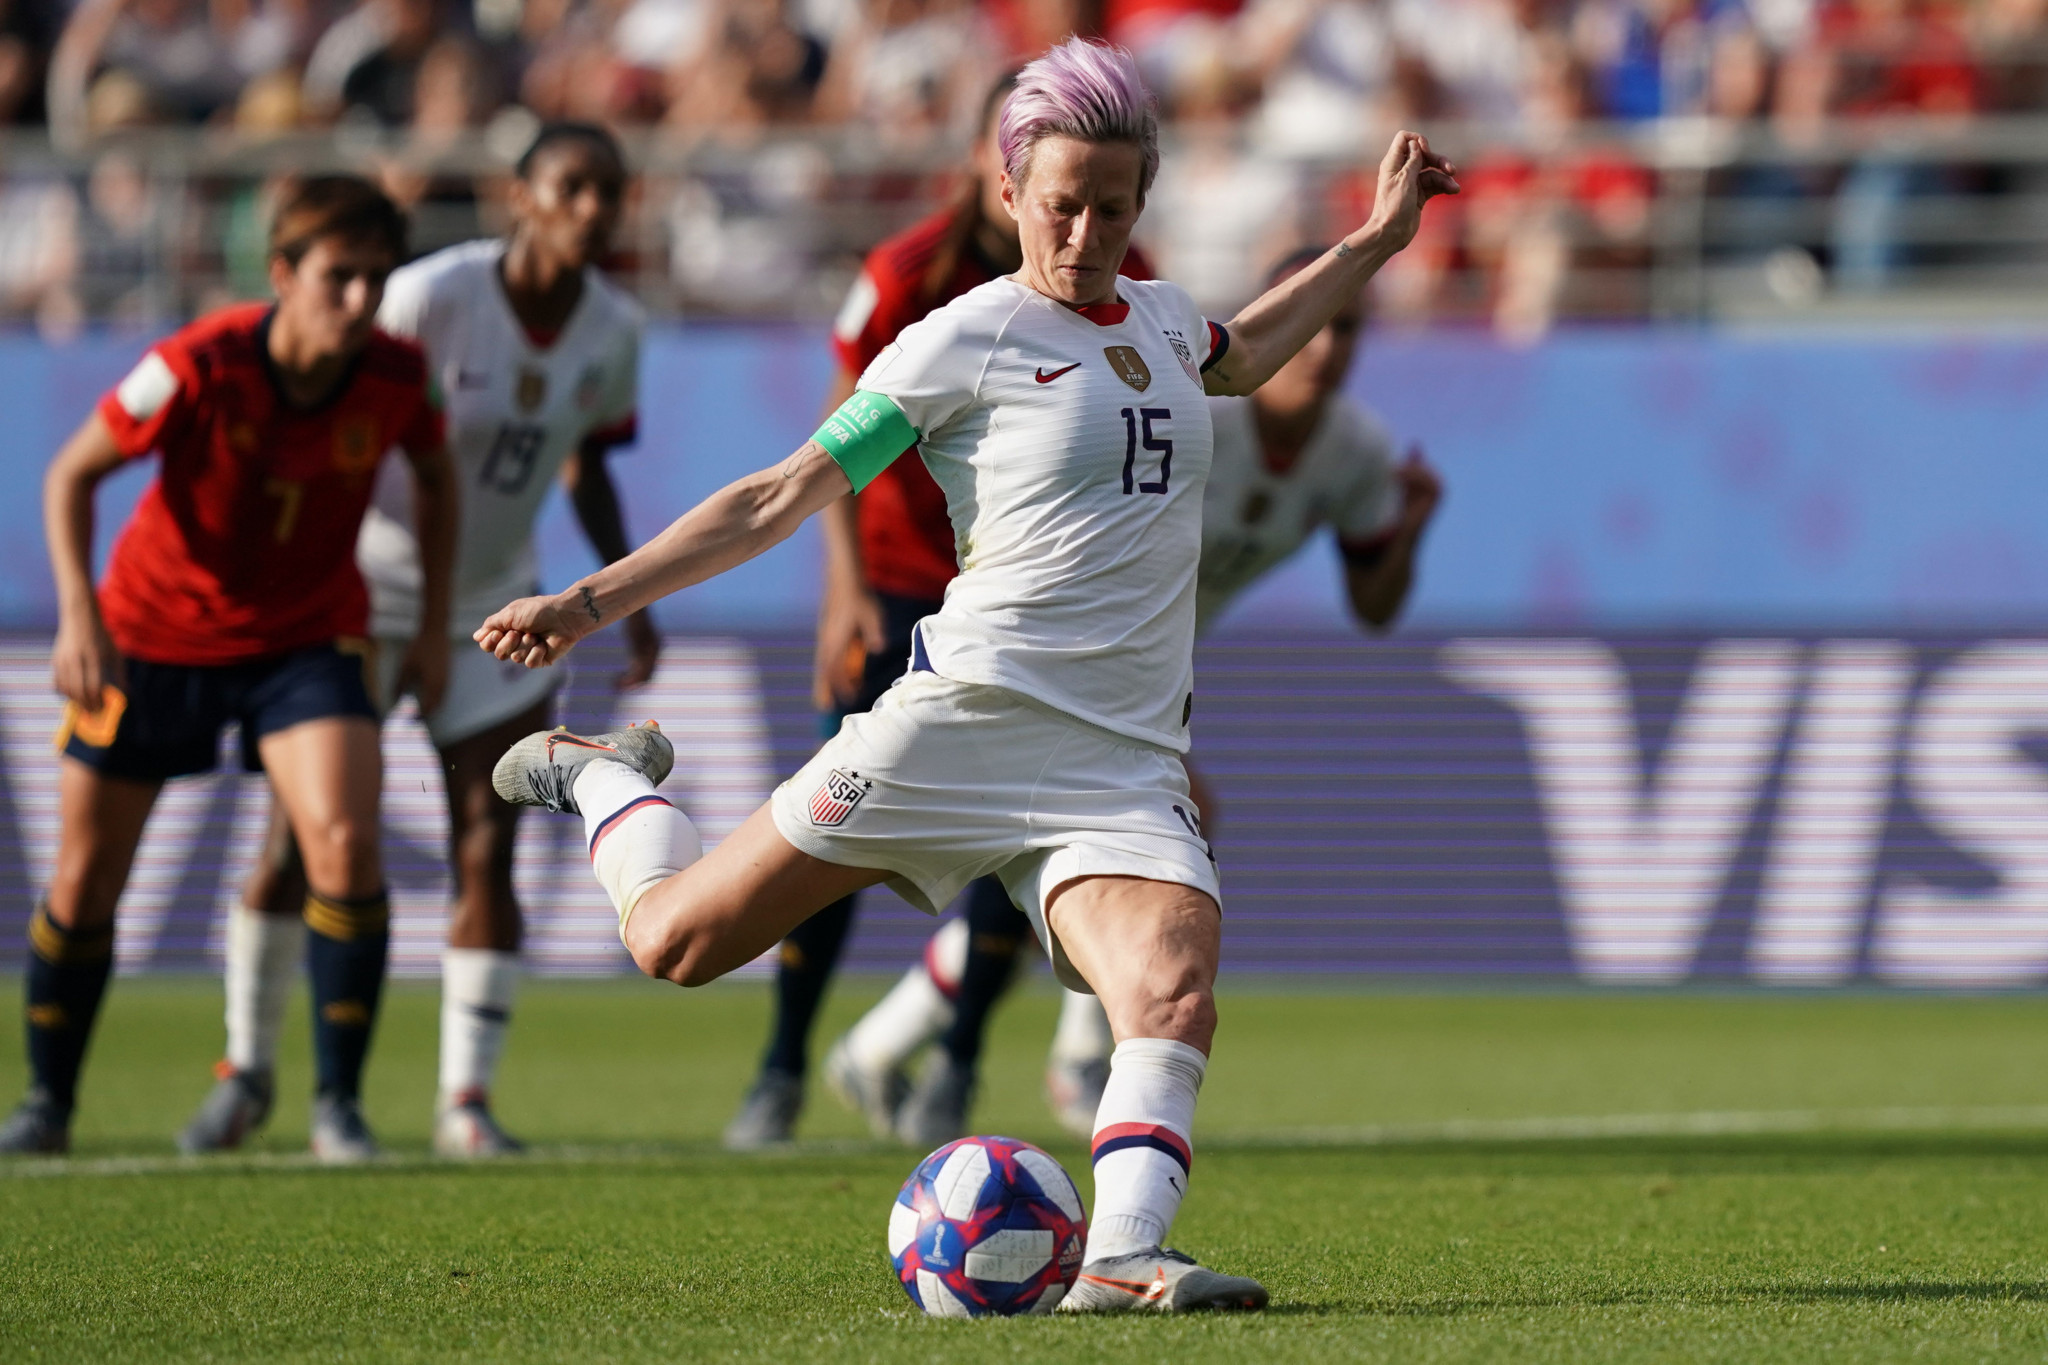 Rapinoe scores twice from penalty spot as holders United States beat Spain in last-16 of FIFA Women's World Cup